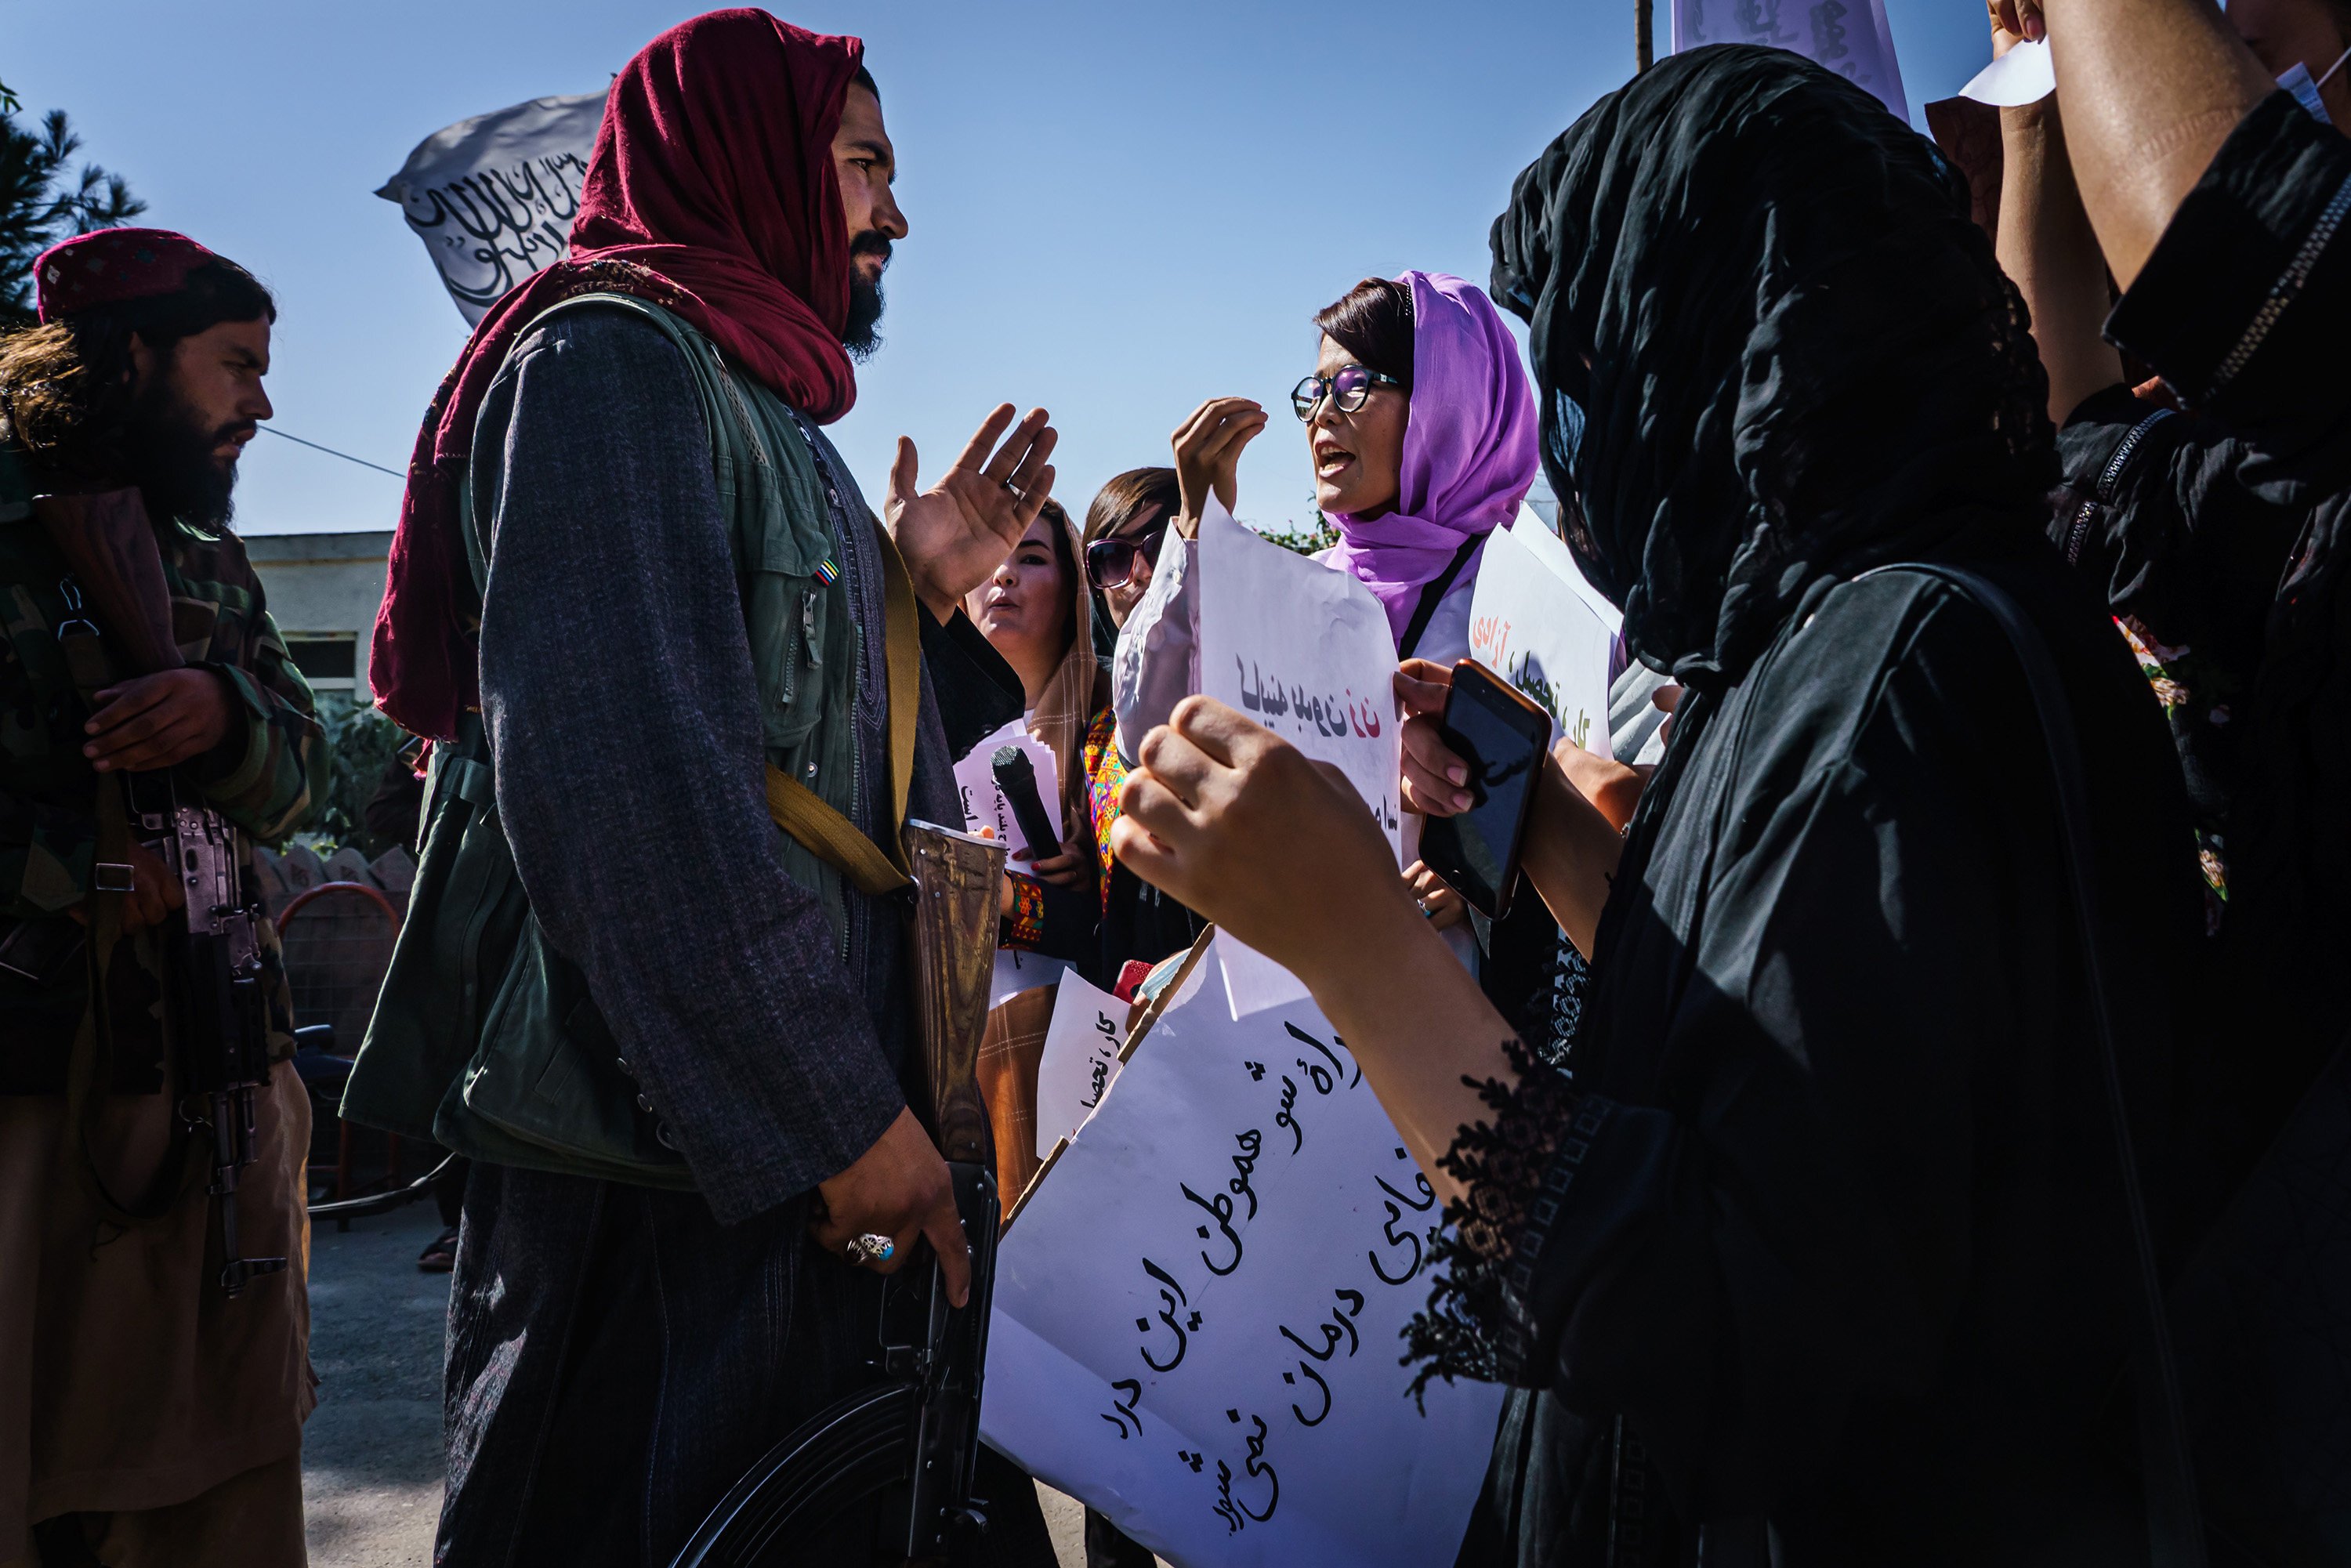 Taliban fighters try to stop protesters marching through the Dashti-E-Barchi neighbourhood, a day after the Taliban announced an all-male interim government with no representation for women and ethnic minority groups, in Kabul, Afghanistan. Photo: TNS